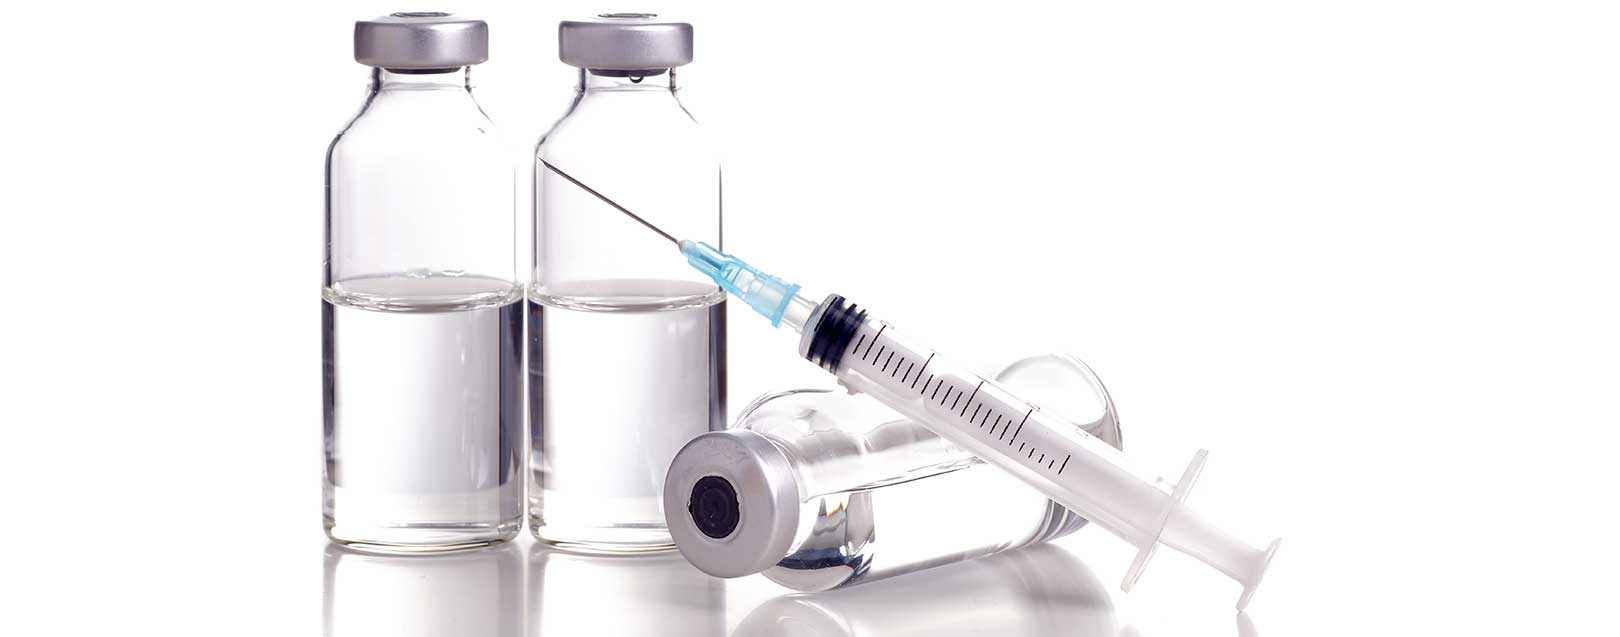 Aurobindo Pharma manufactures anesthetic injections in US